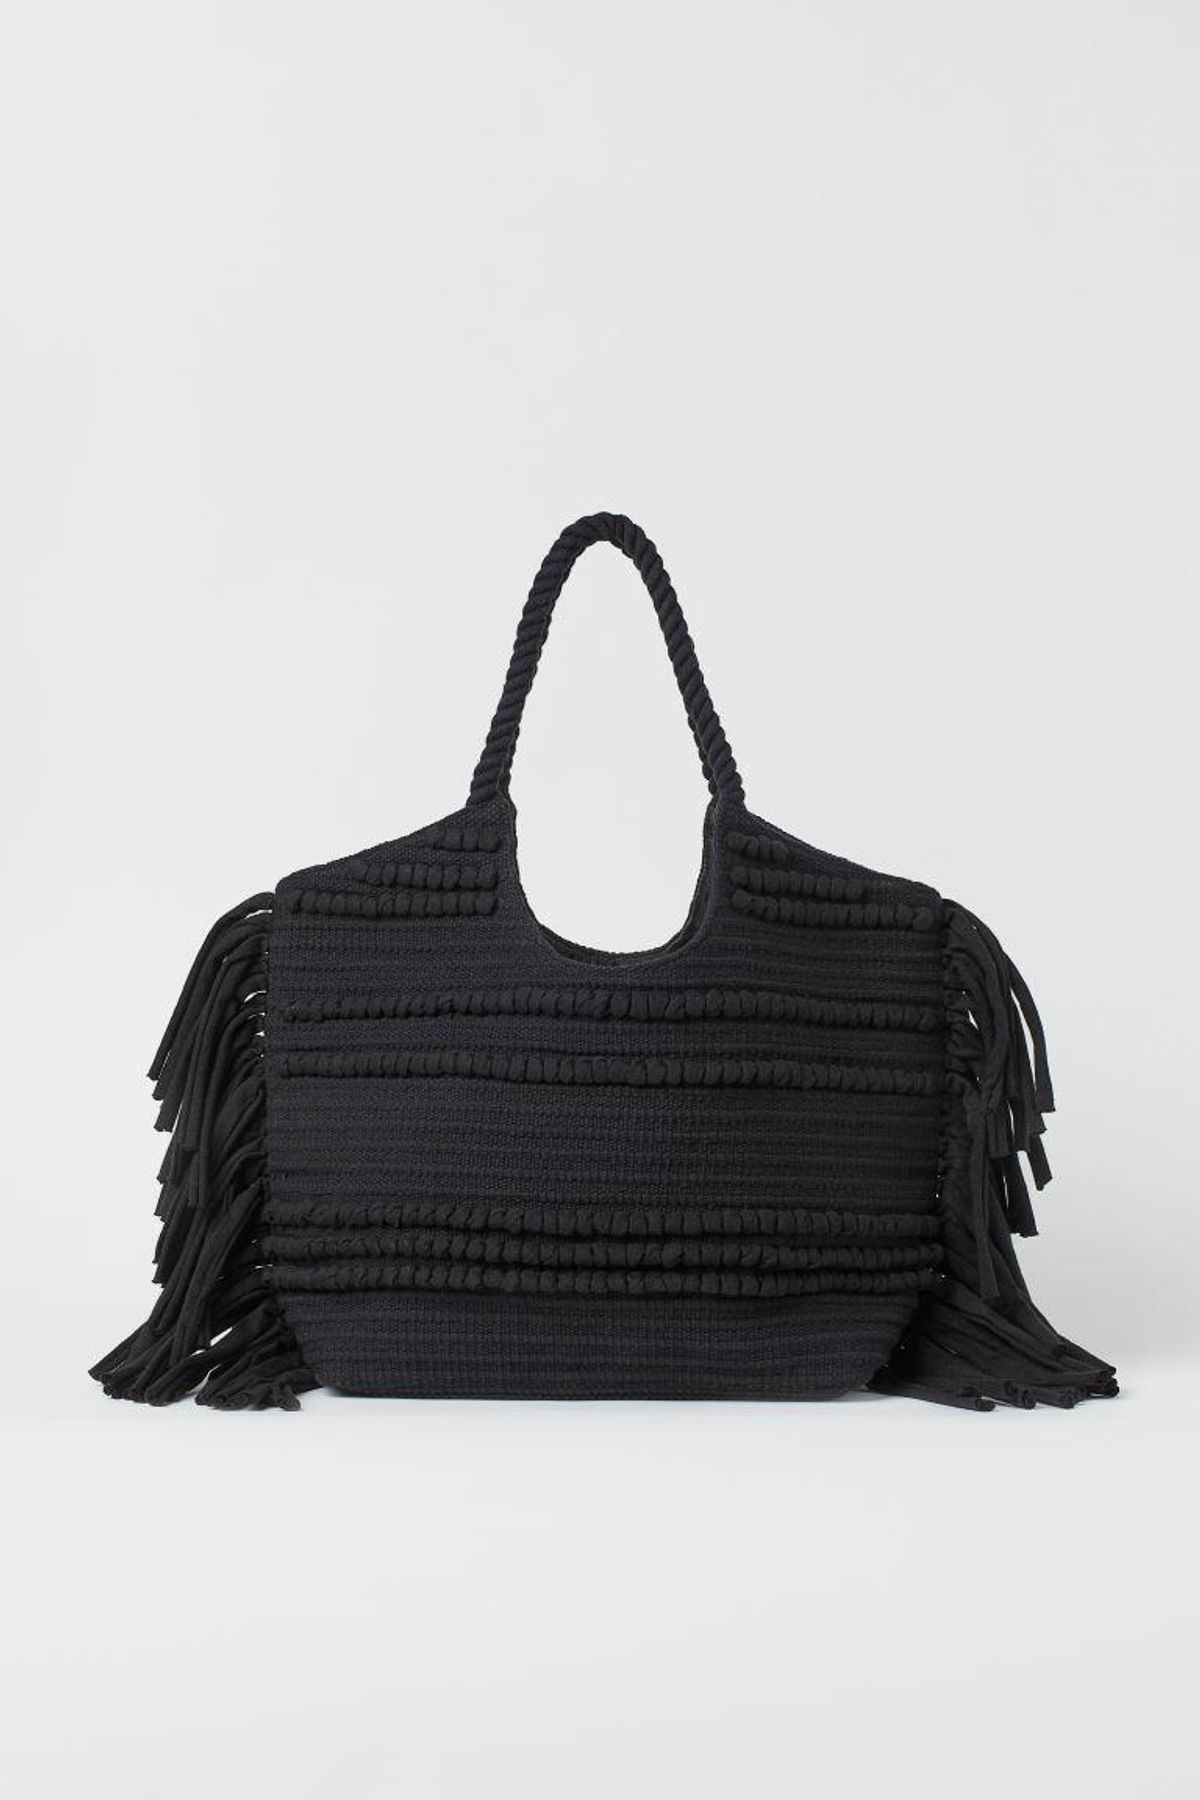 h and m fringed shopper